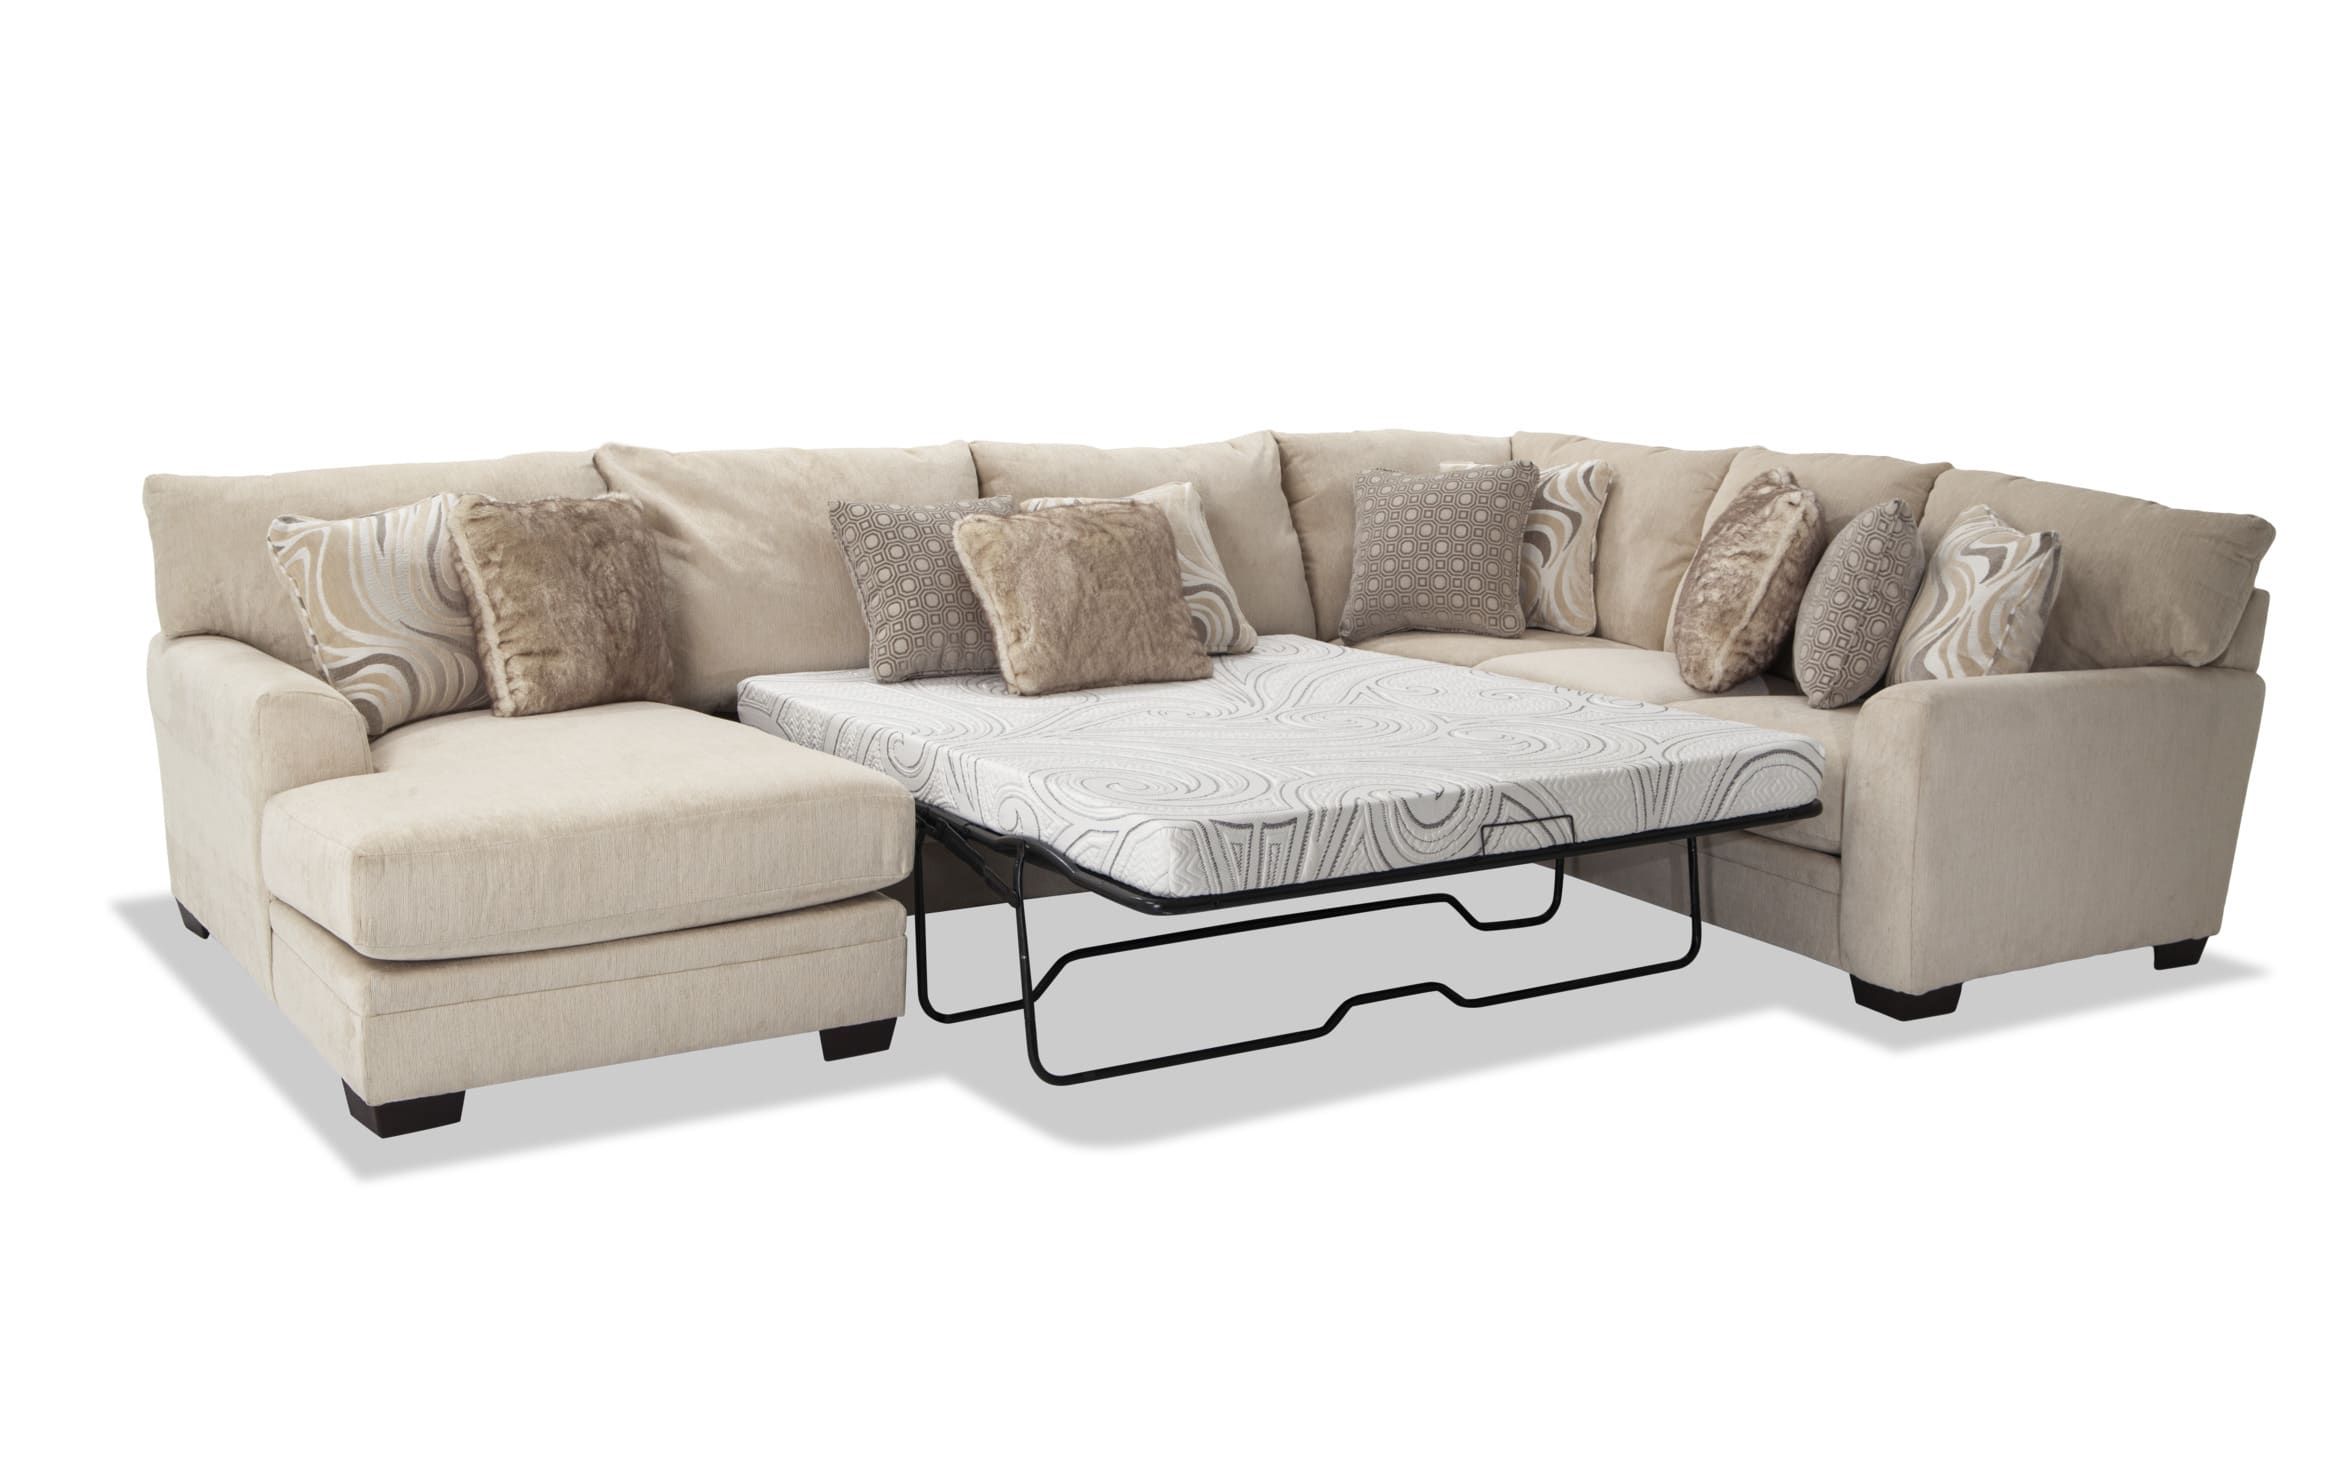 Luxe Cream 4 Piece Right Arm Facing Bob O Pedic Cooling Queen Sleeper  Sectional With Chaise | Bob'S Discount Furniture For Left Or Right Facing Sleeper Sectional Sofas (View 3 of 15)